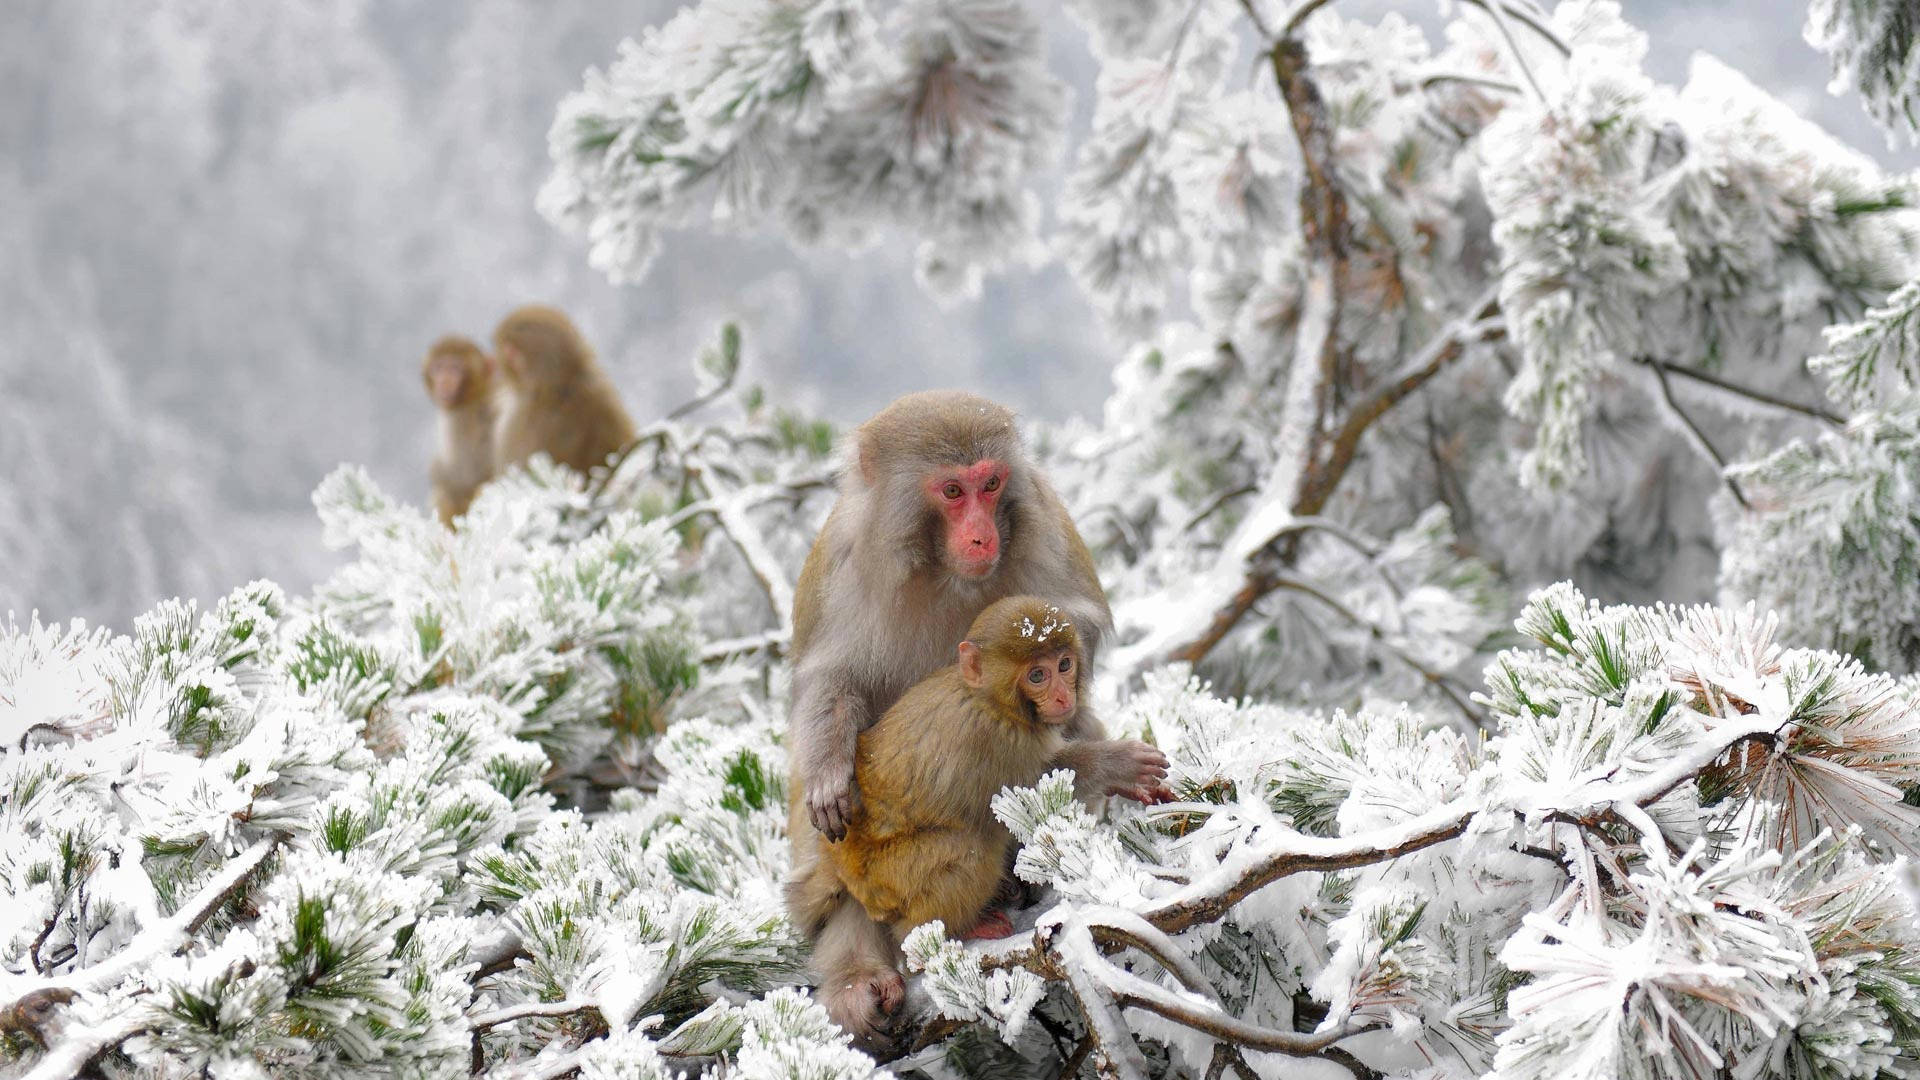 Download Cold Apes In Japan Winter Wallpaper